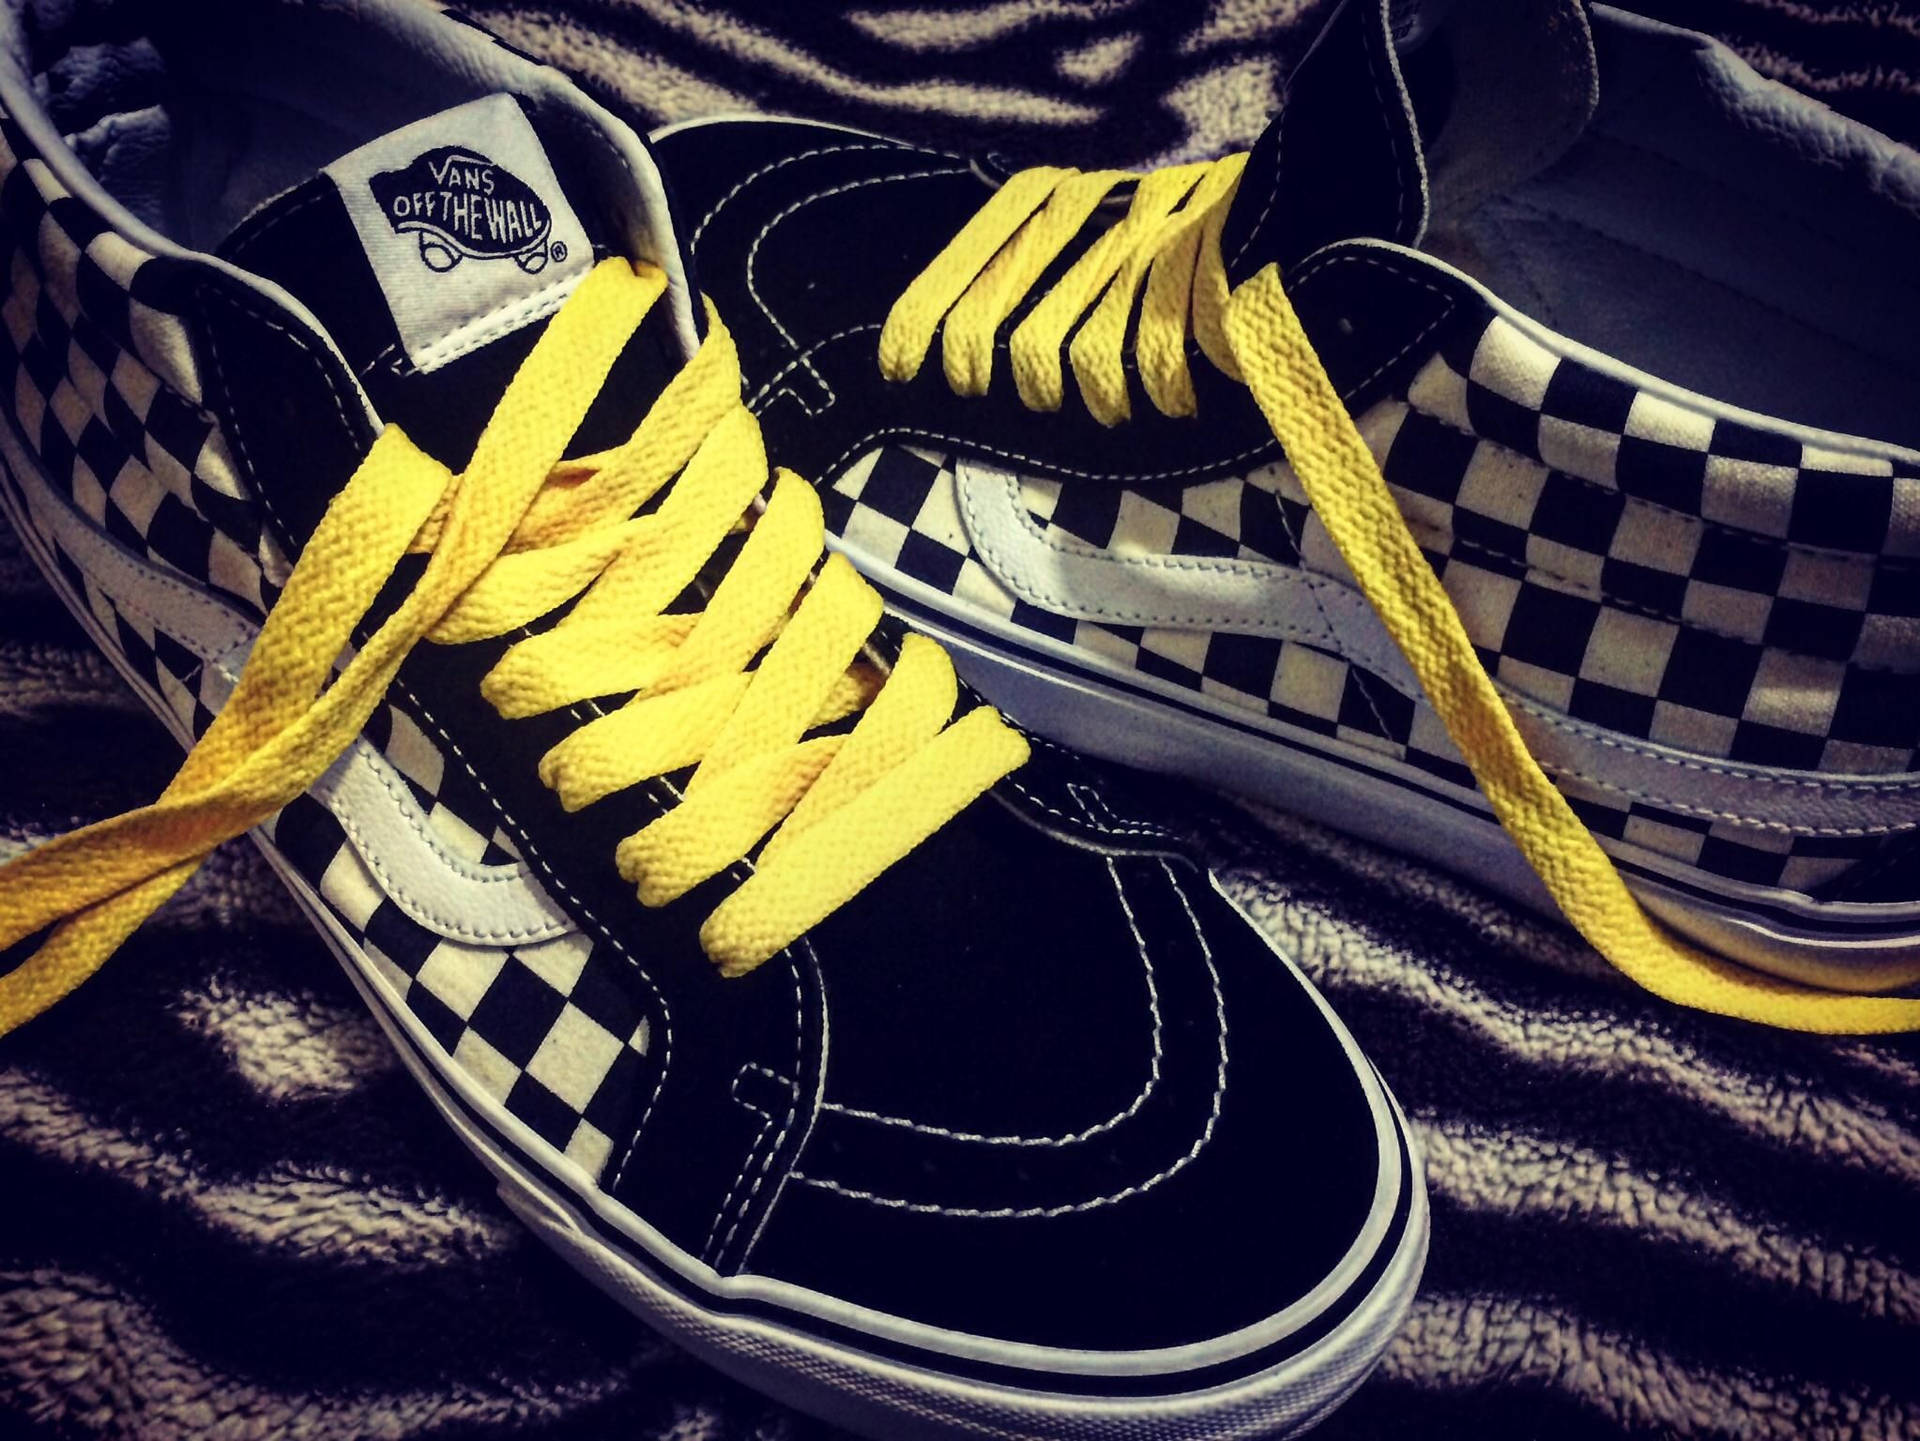 Vans Off The Wall Yellow Laces Wallpaper